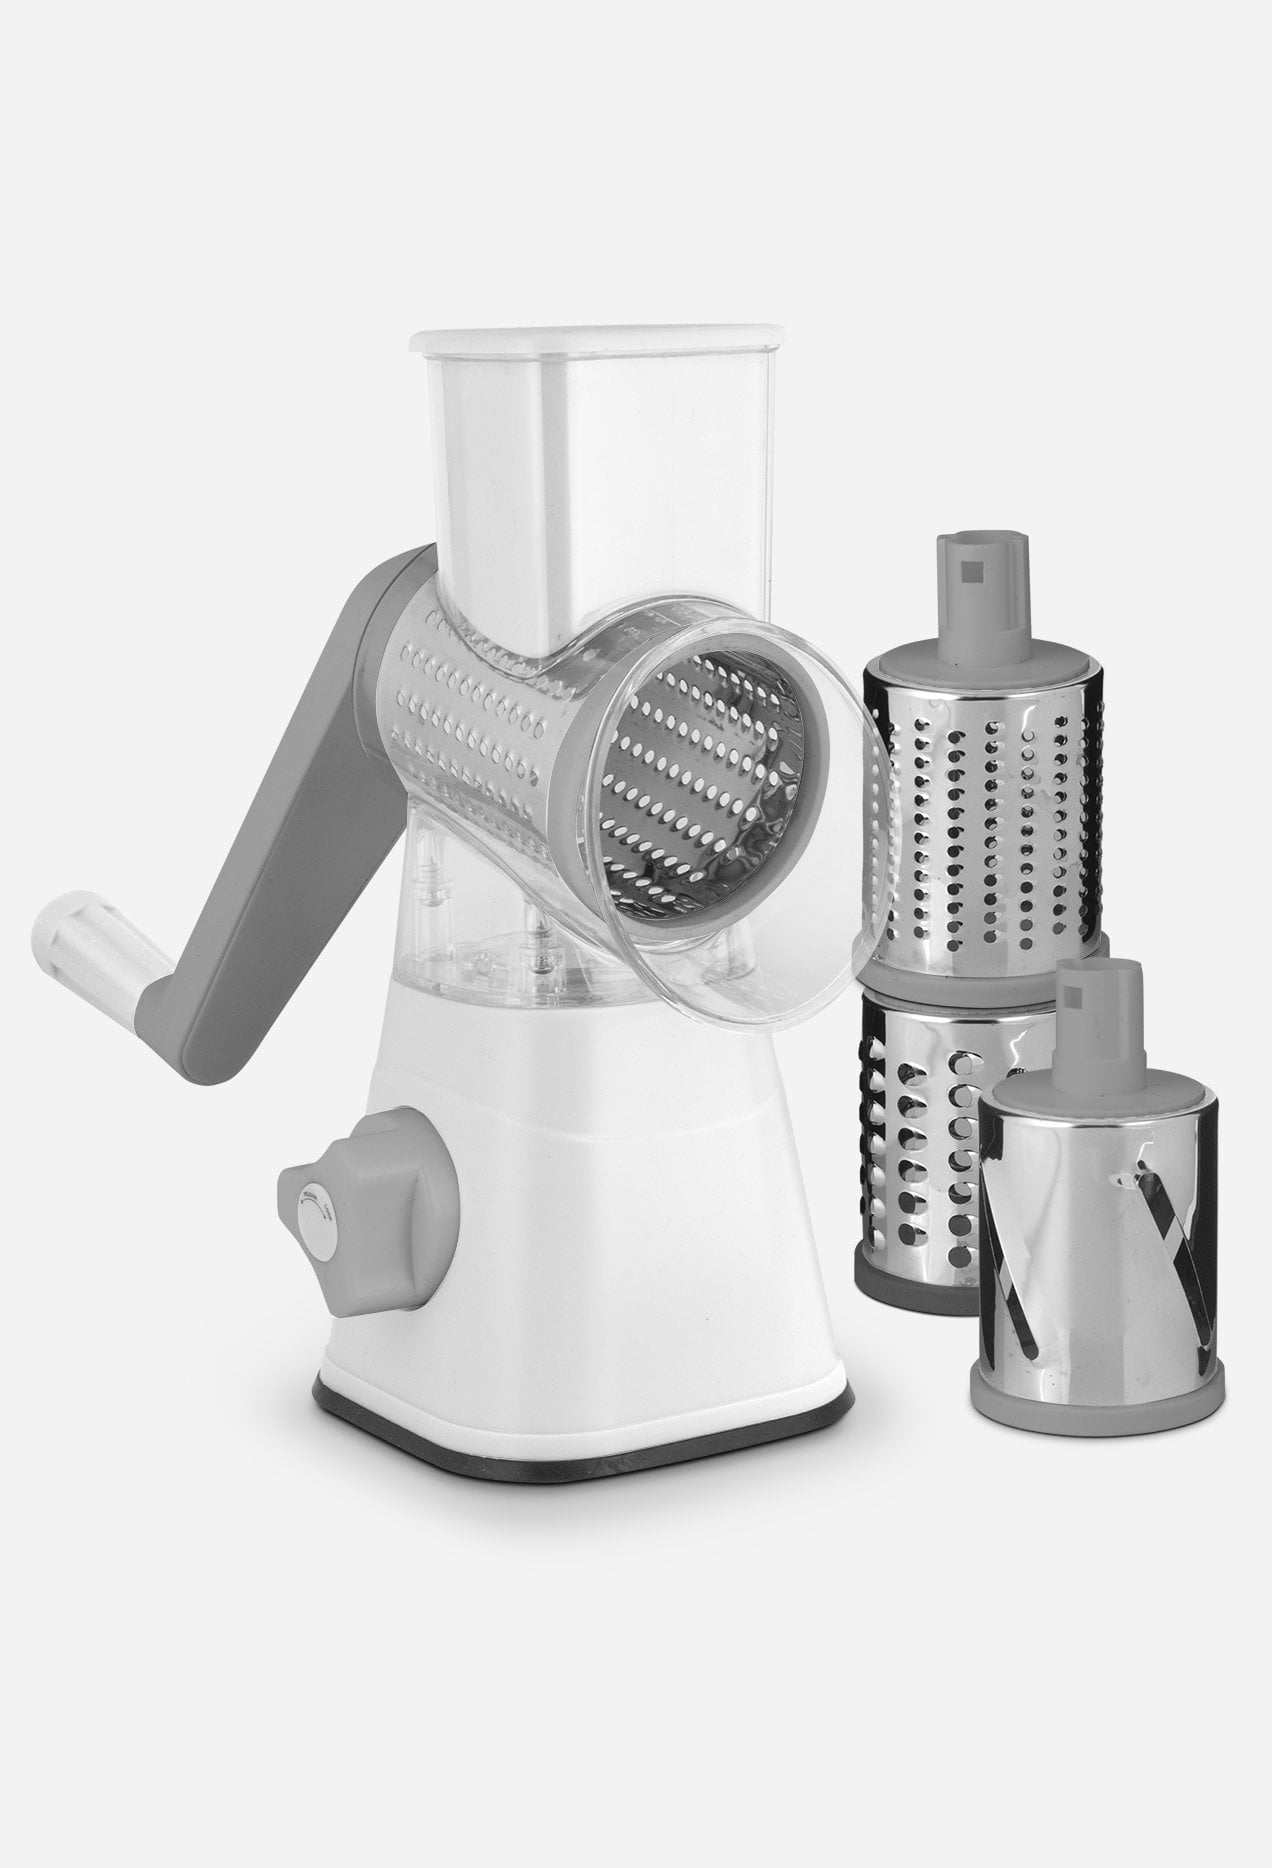 FOOD CUTTER No. 1 SHREDDER Grating CONE – No. 1 Cono Rallador fits:  original Health Craft, Jet-O-Matic, Saladmaster, West Bend, Regalware, and  others.